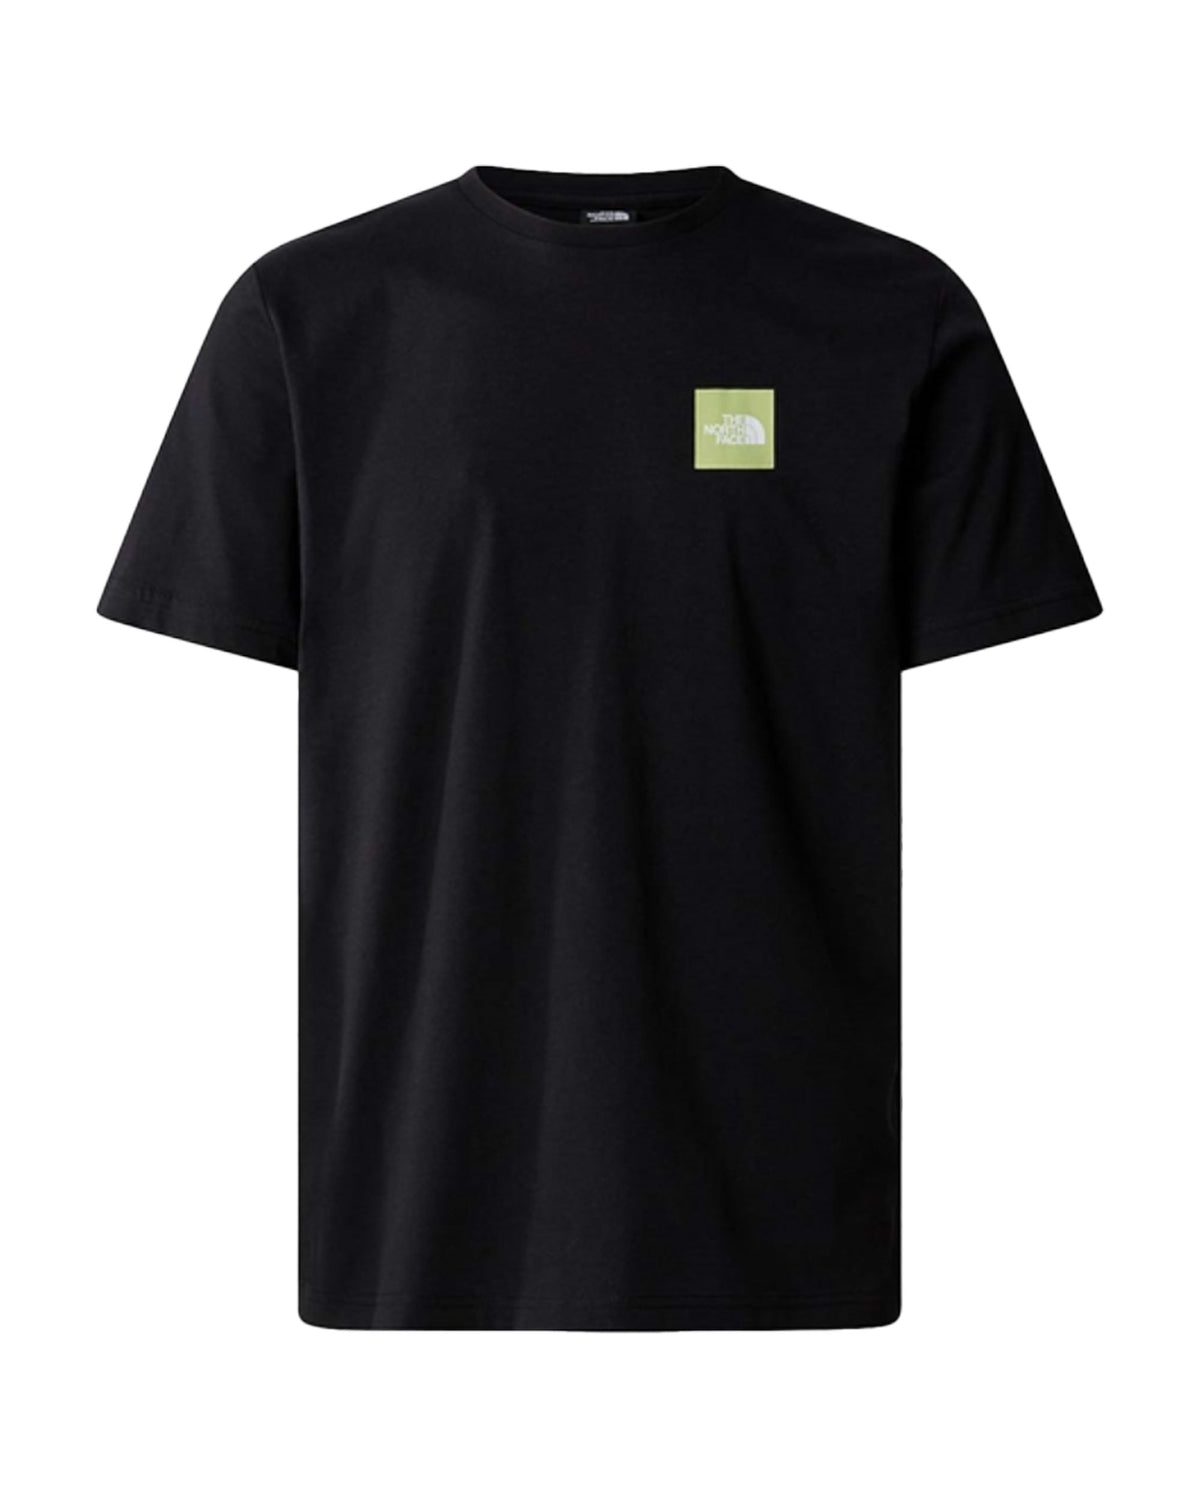 Man Tee The North Face Coordinate Black